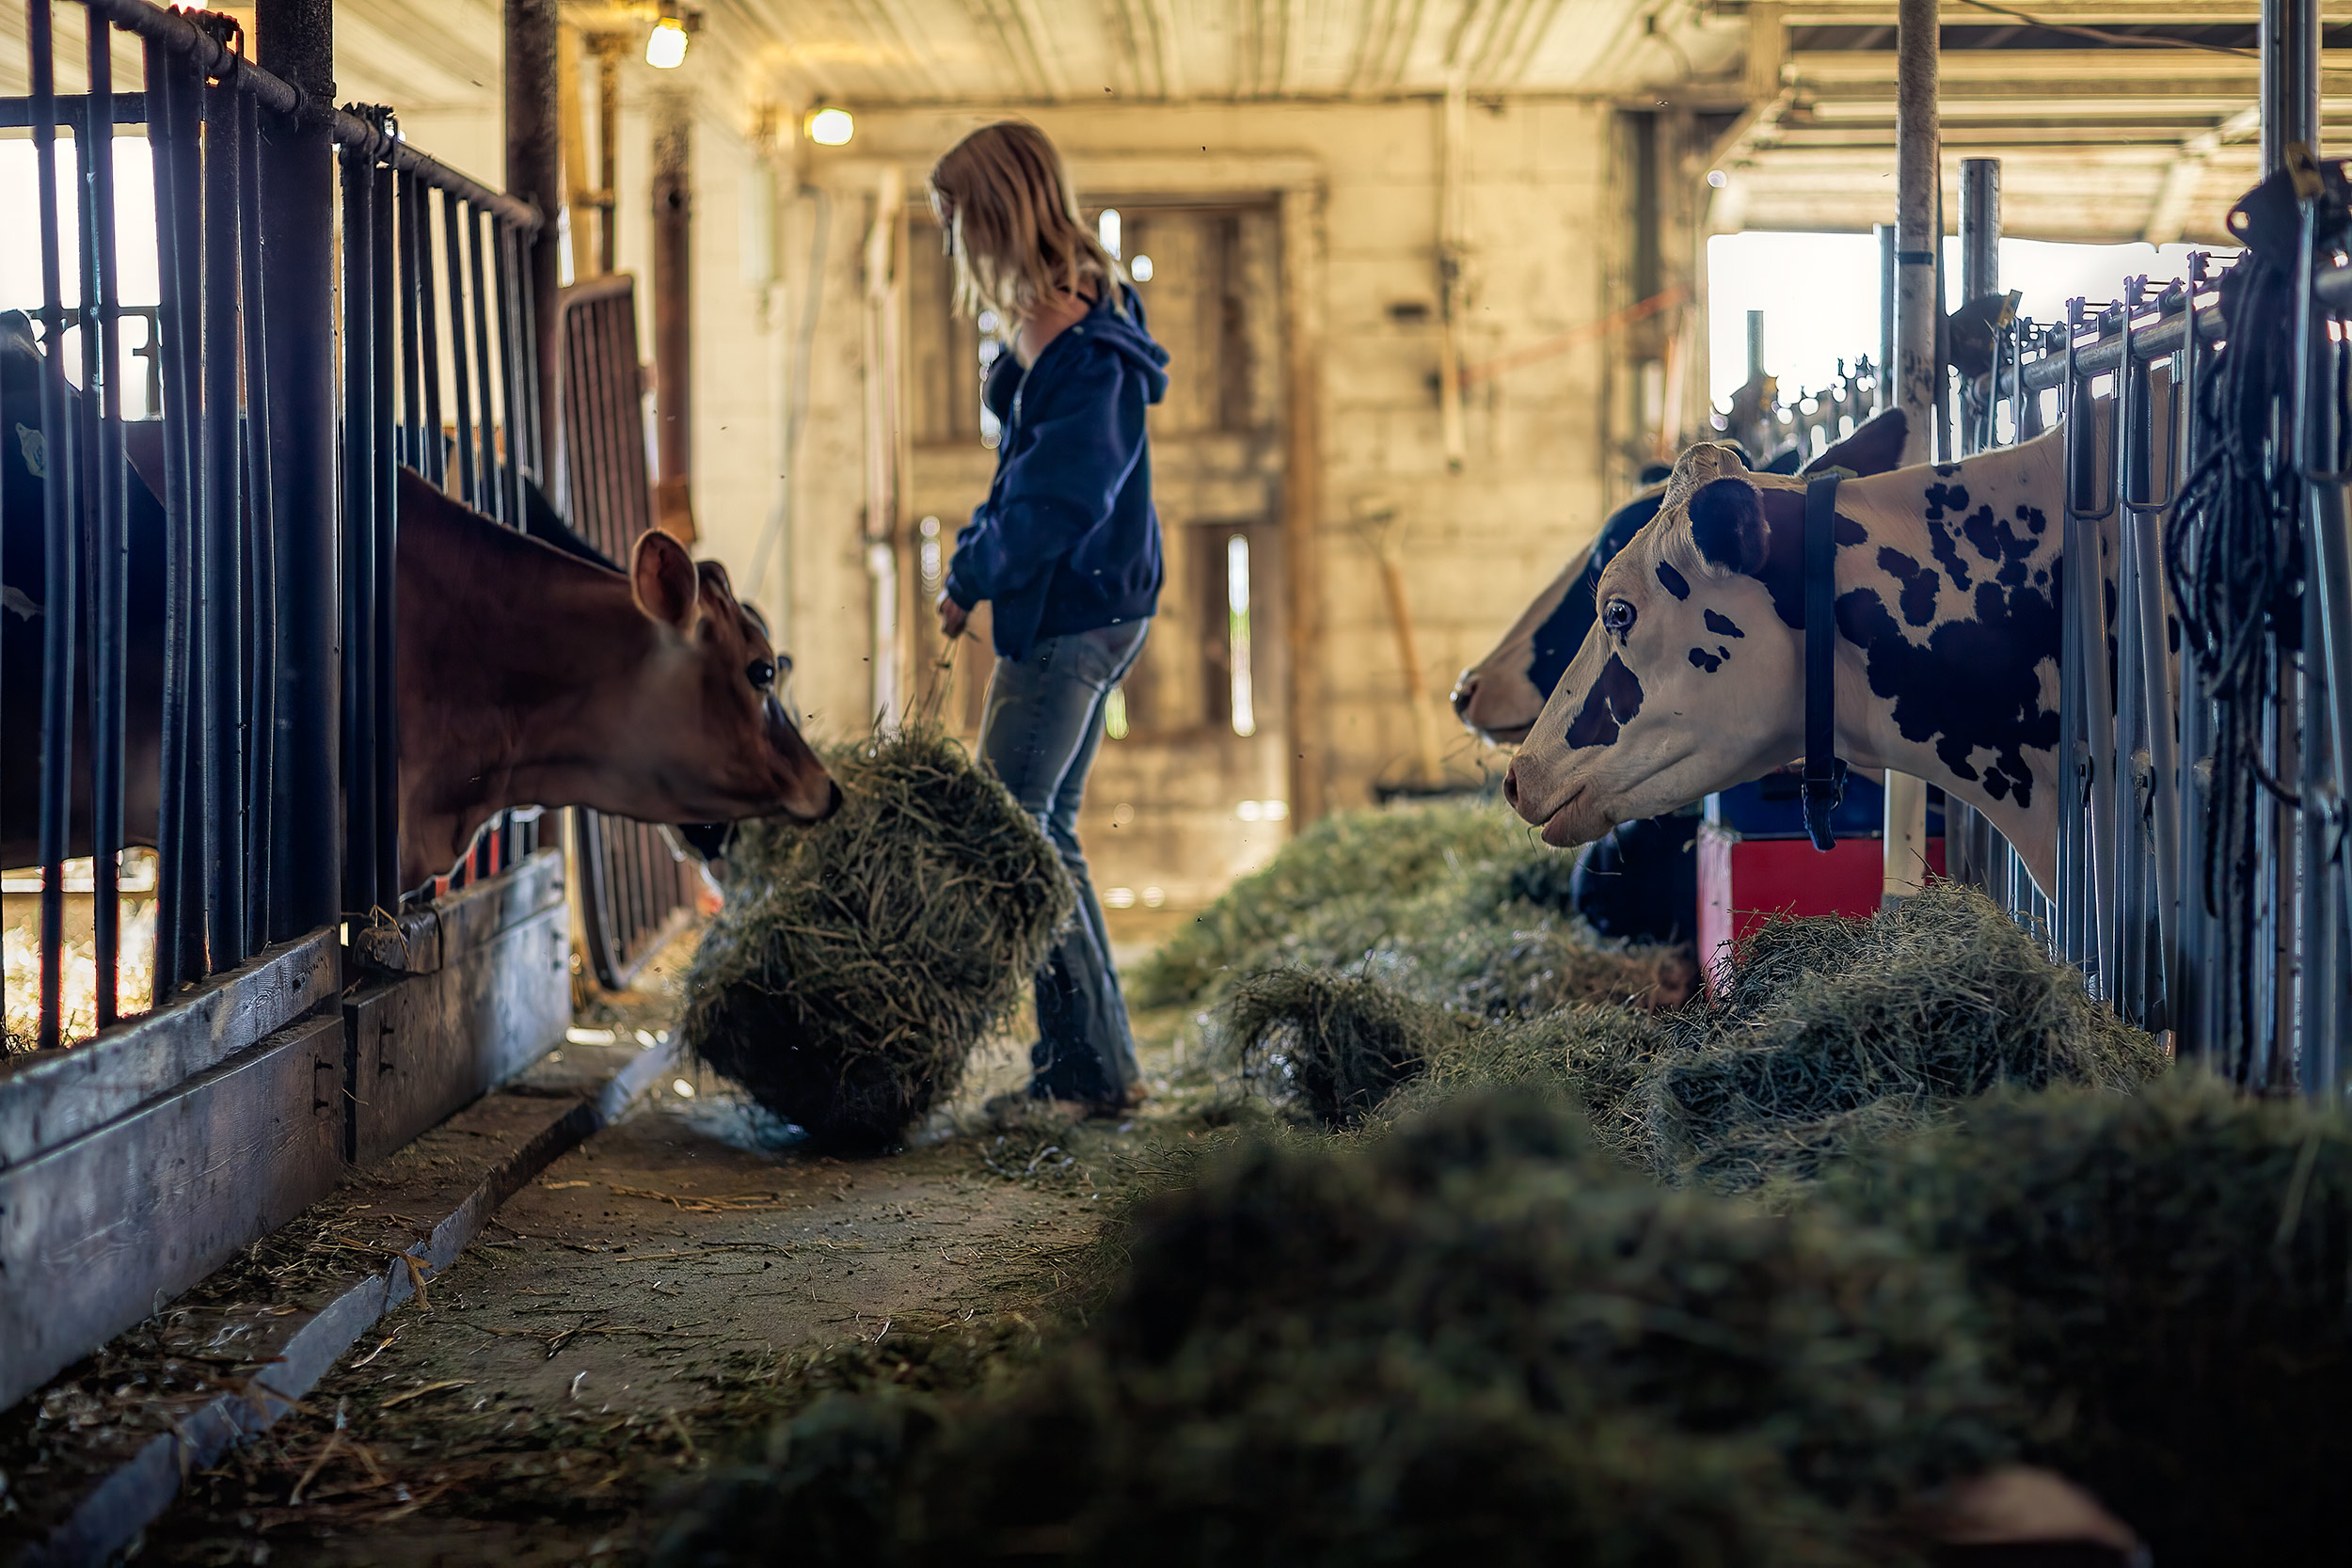 Agriculture Photography young girl feeding dairy cows in barn